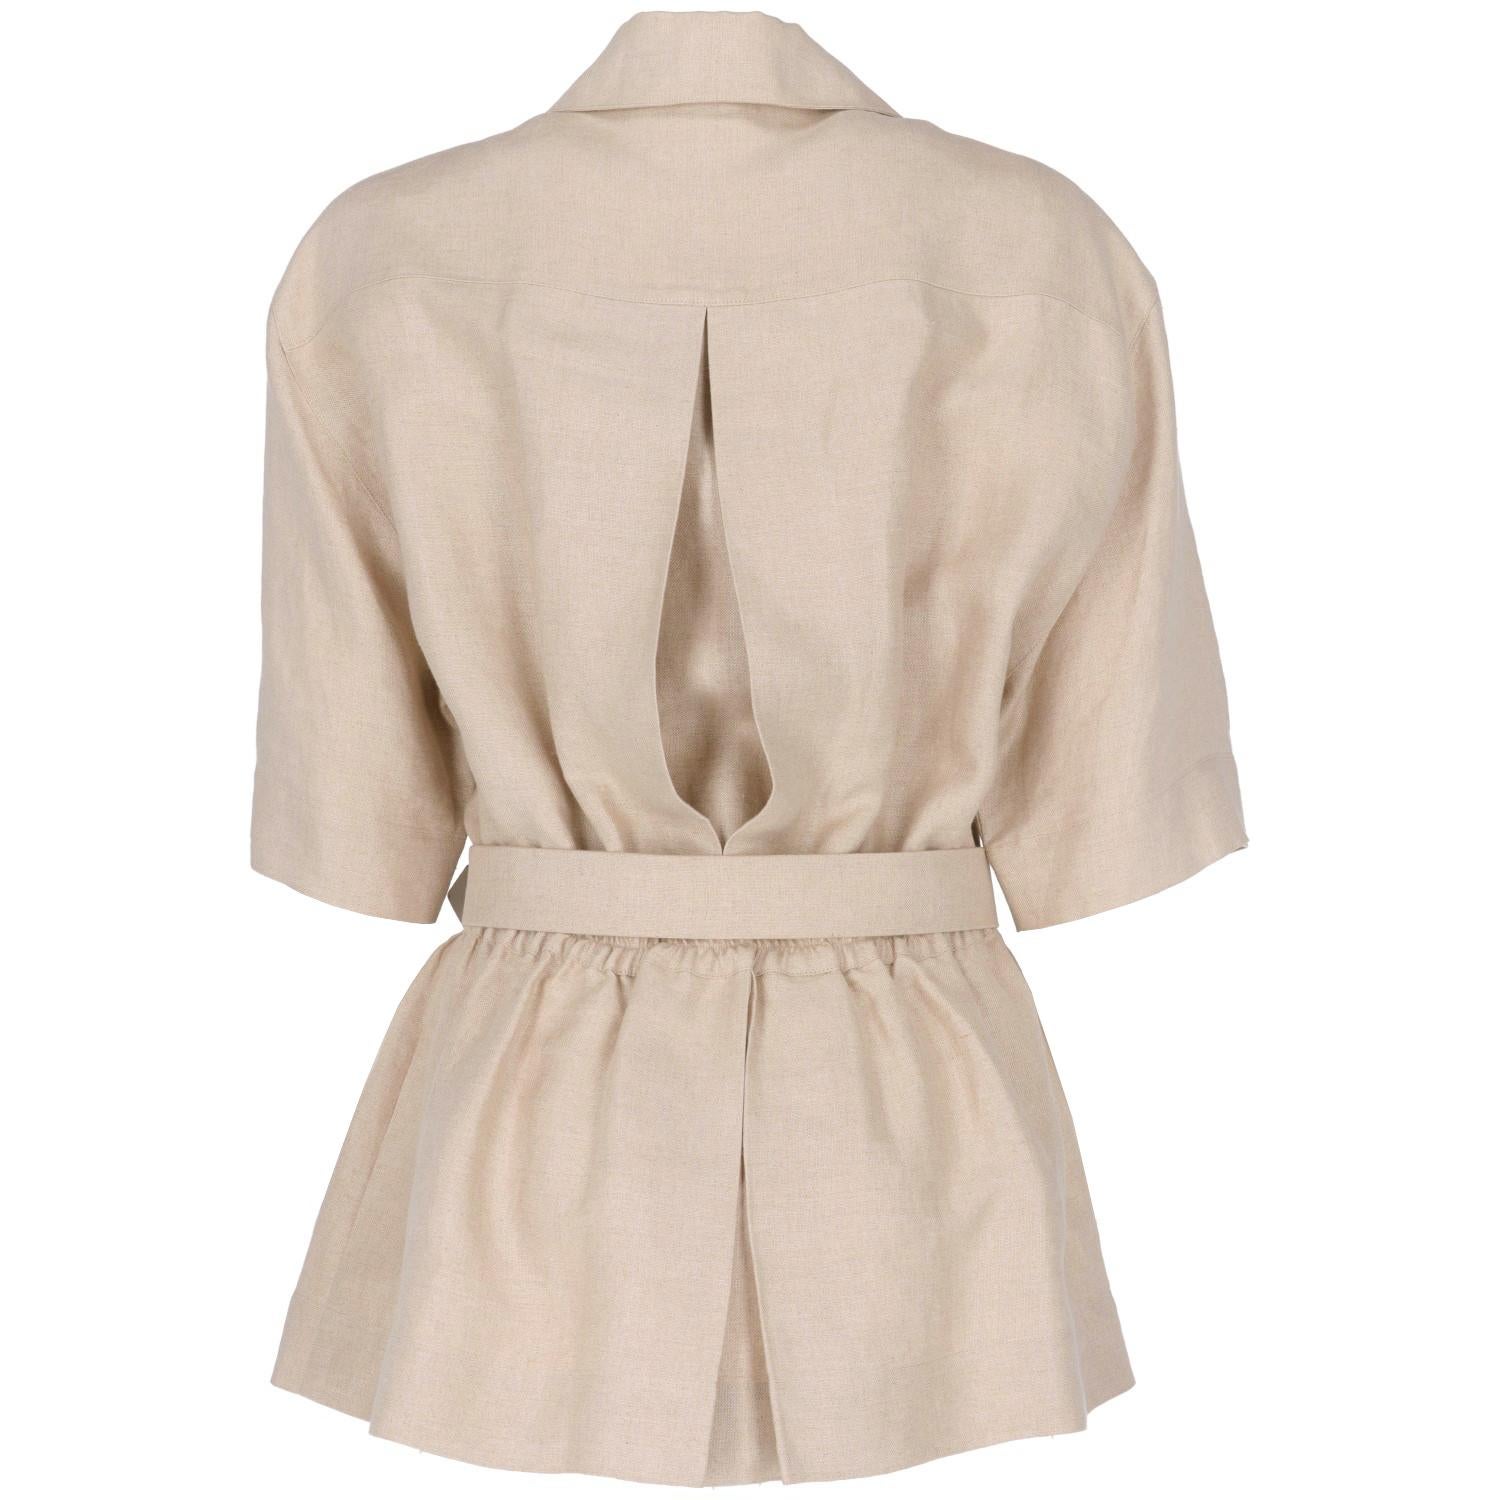 
Chanel sophisticated beige blend silk and linen belted jacket, featuring a loose cut with highlighted waistline. 
Feminine pleated collar and gold-tone metal buttons with a beautiful quilted texture, short sleeves, two patch pockets on the chest